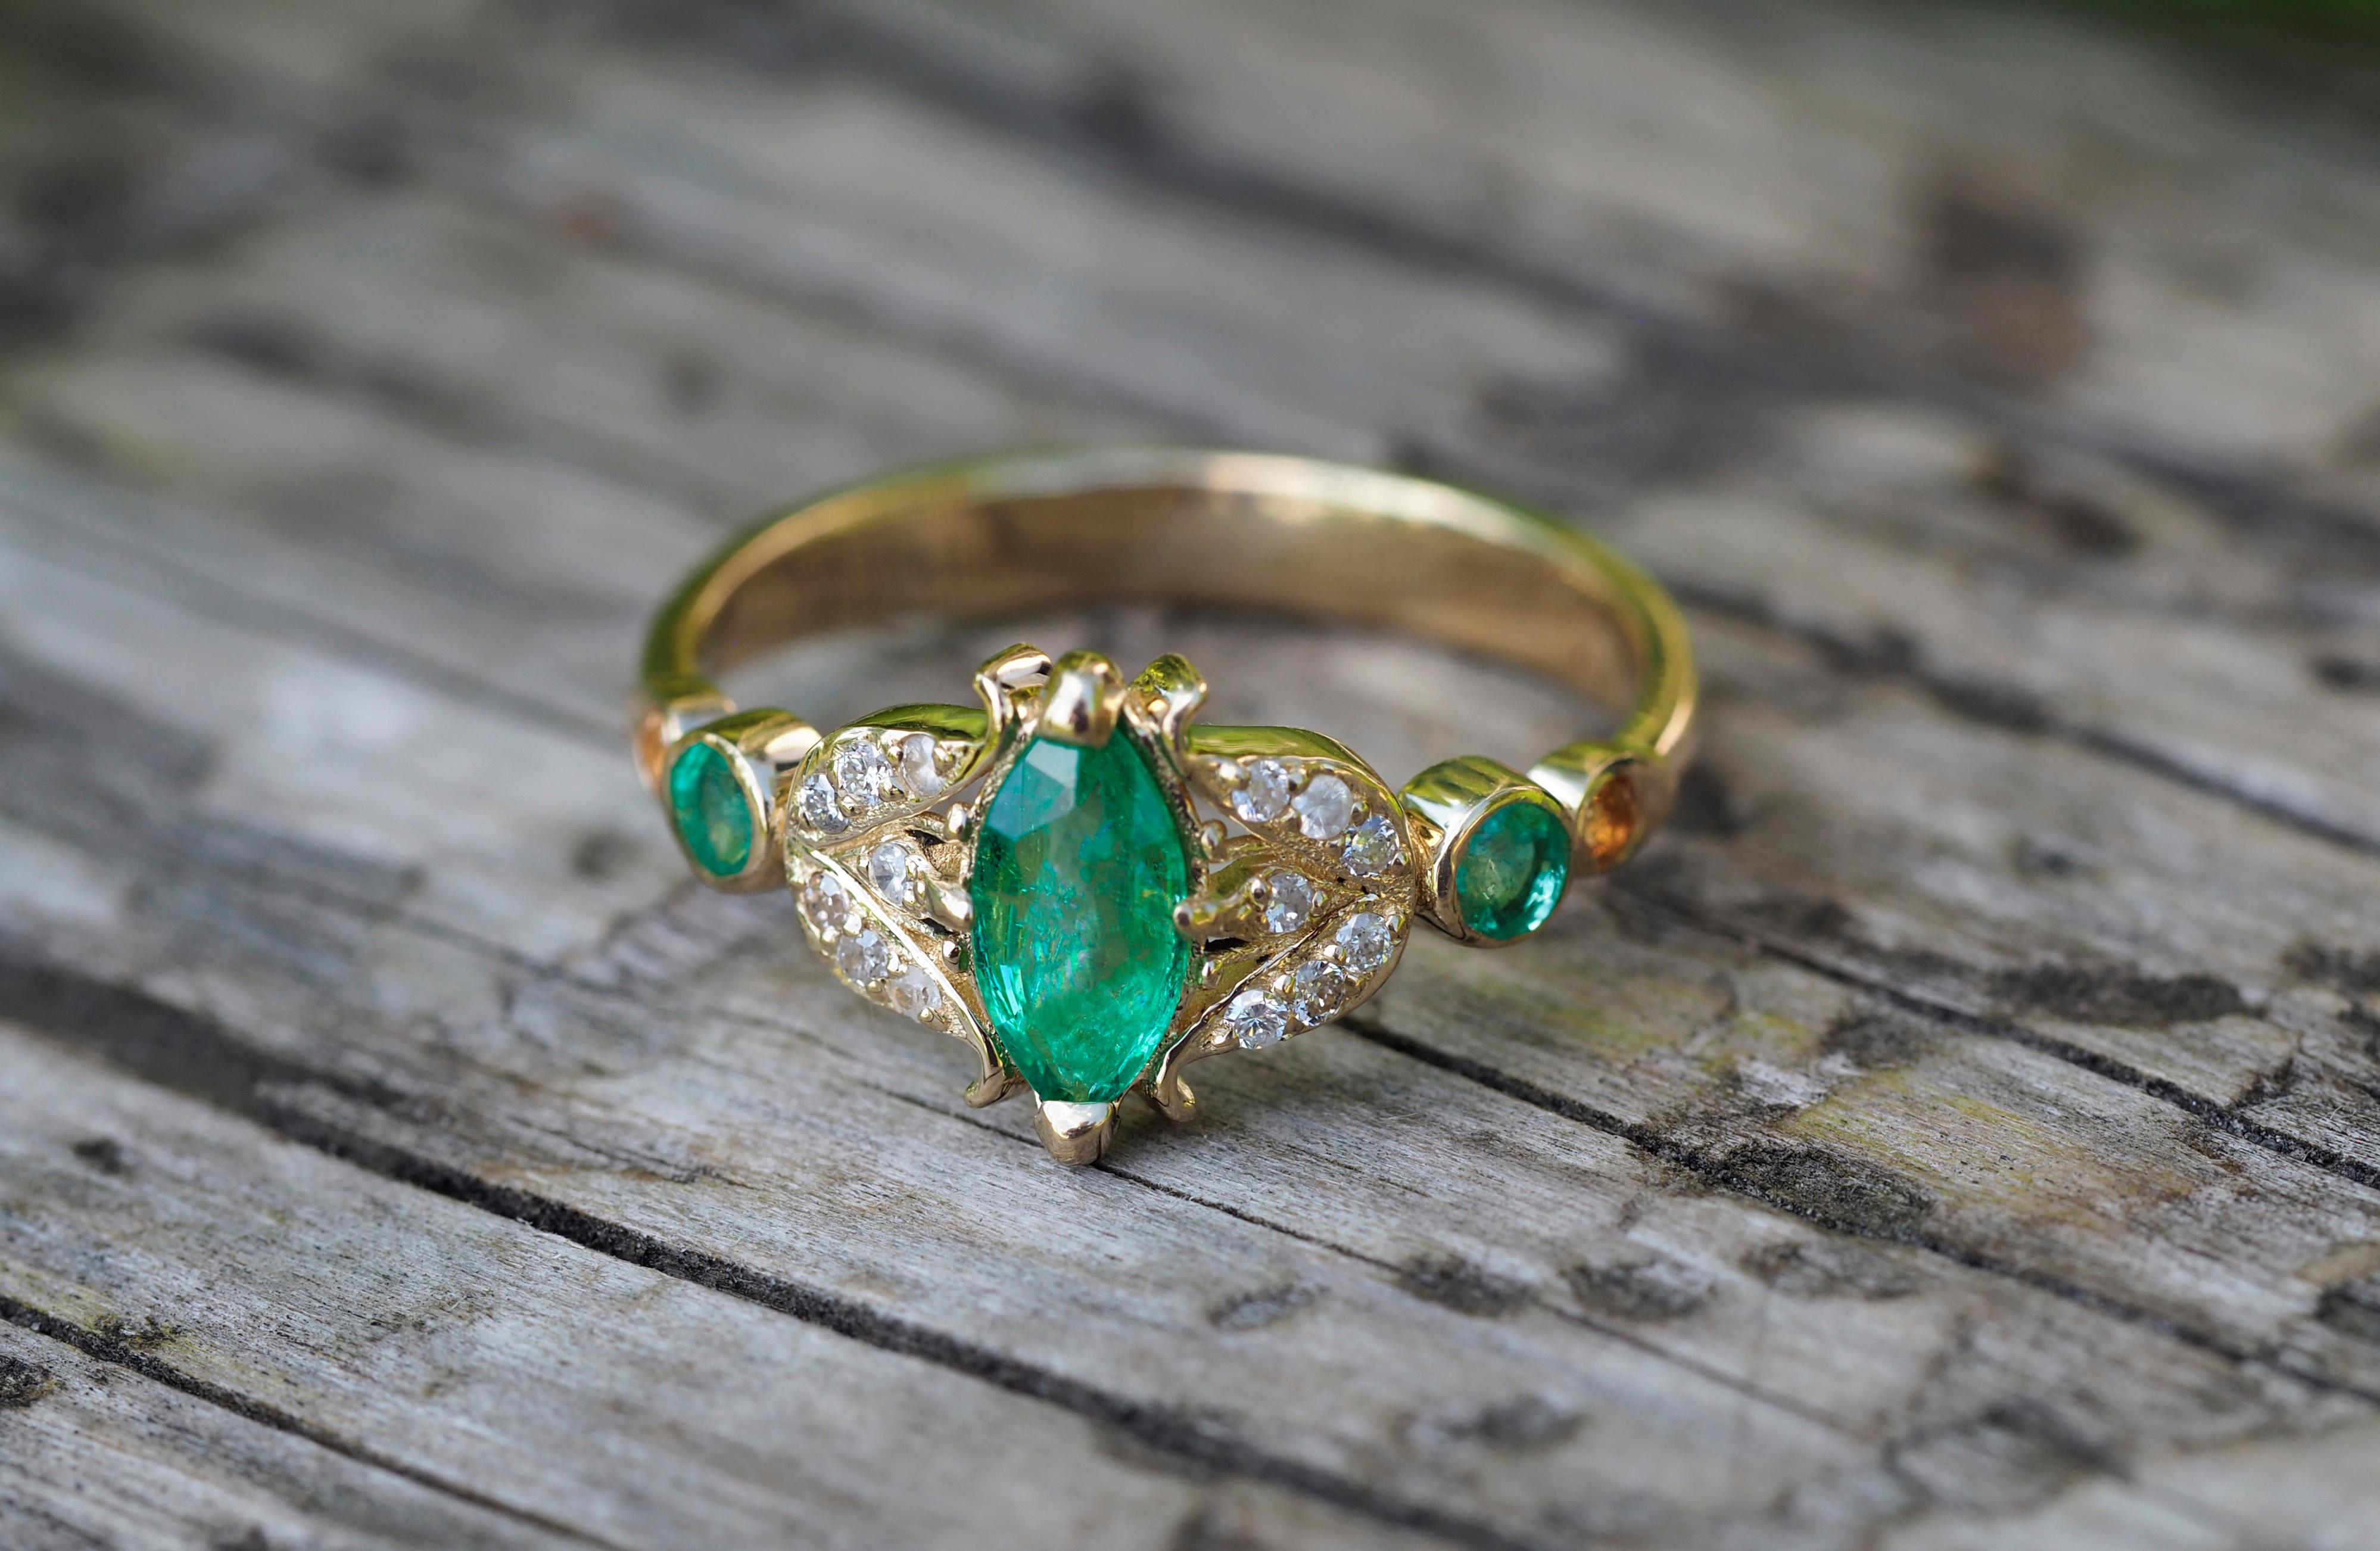 For Sale:  Gold Ring with Marquise Emerald. Vintage inspired emerald ring 9